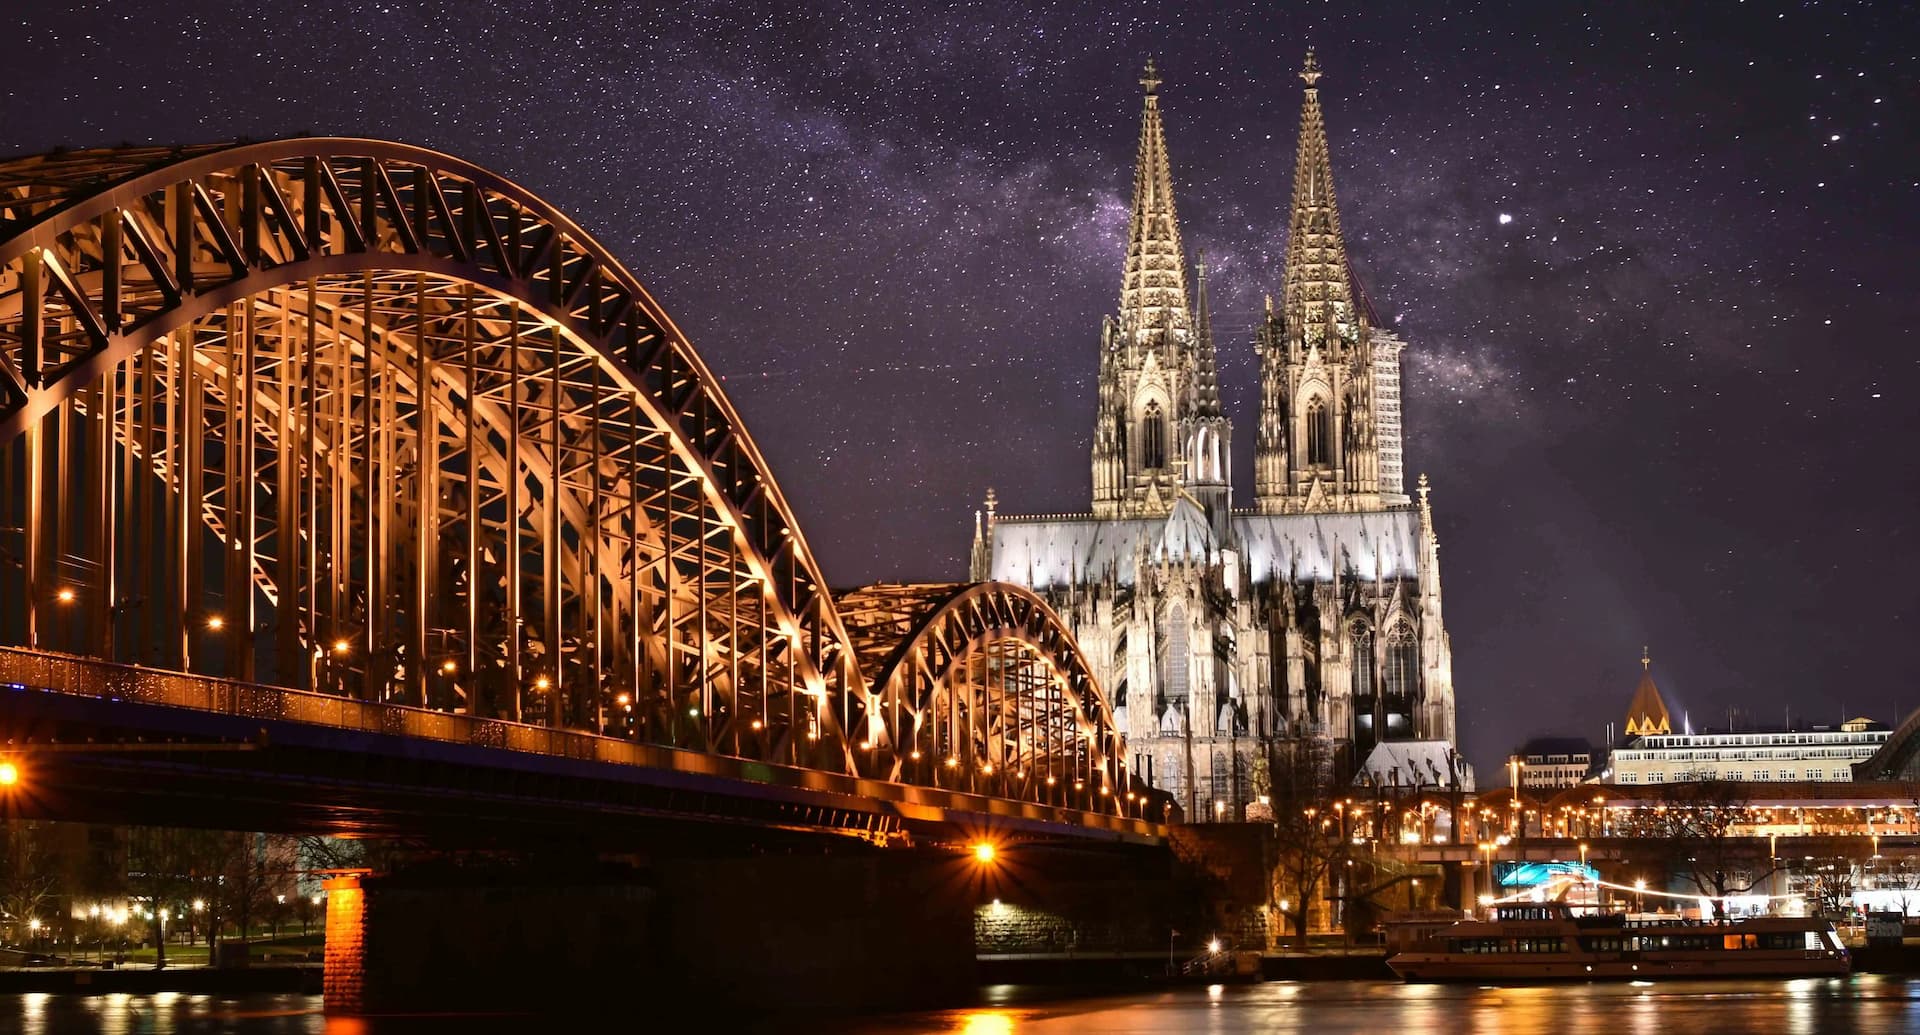 A night view of a bridge and cathedral with a starry sky background.